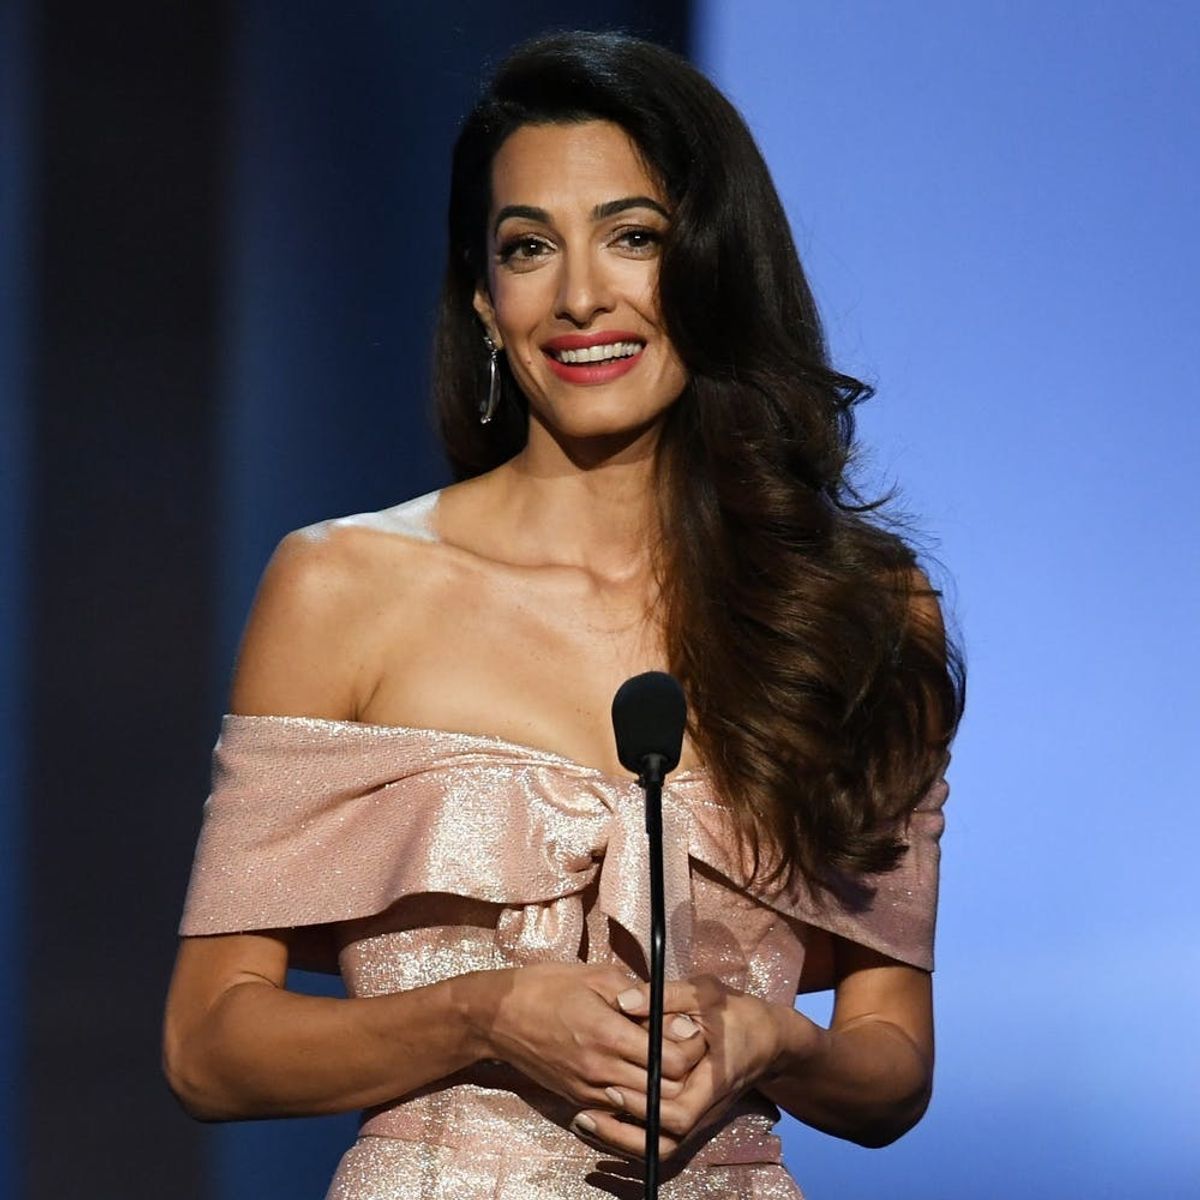 Amal Clooney Gave the Sweetest, Most Touching Speech About George Clooney